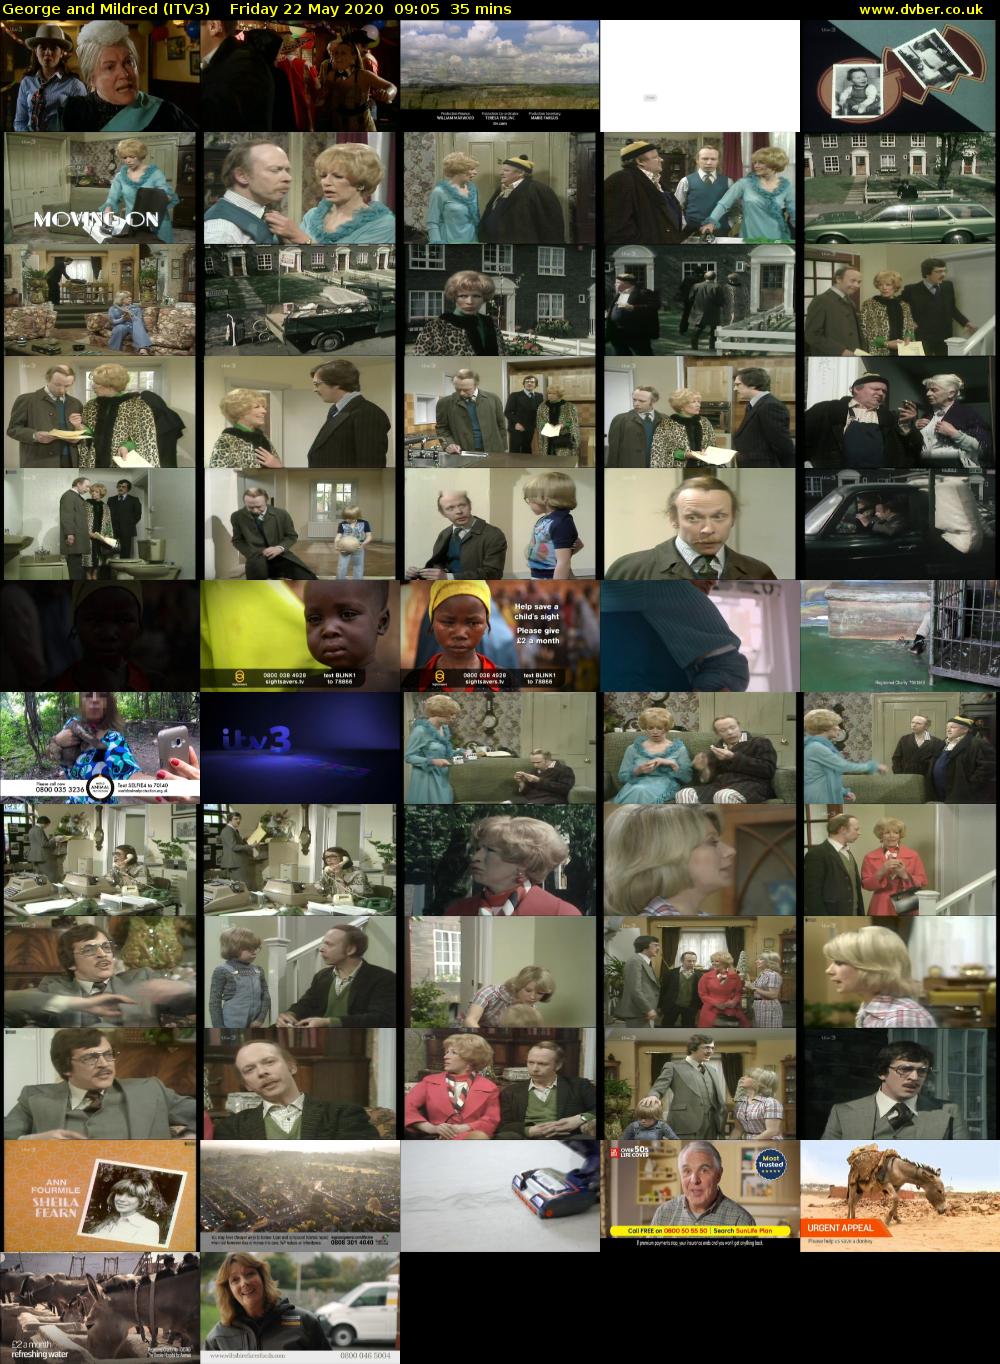 George and Mildred (ITV3) Friday 22 May 2020 09:05 - 09:40